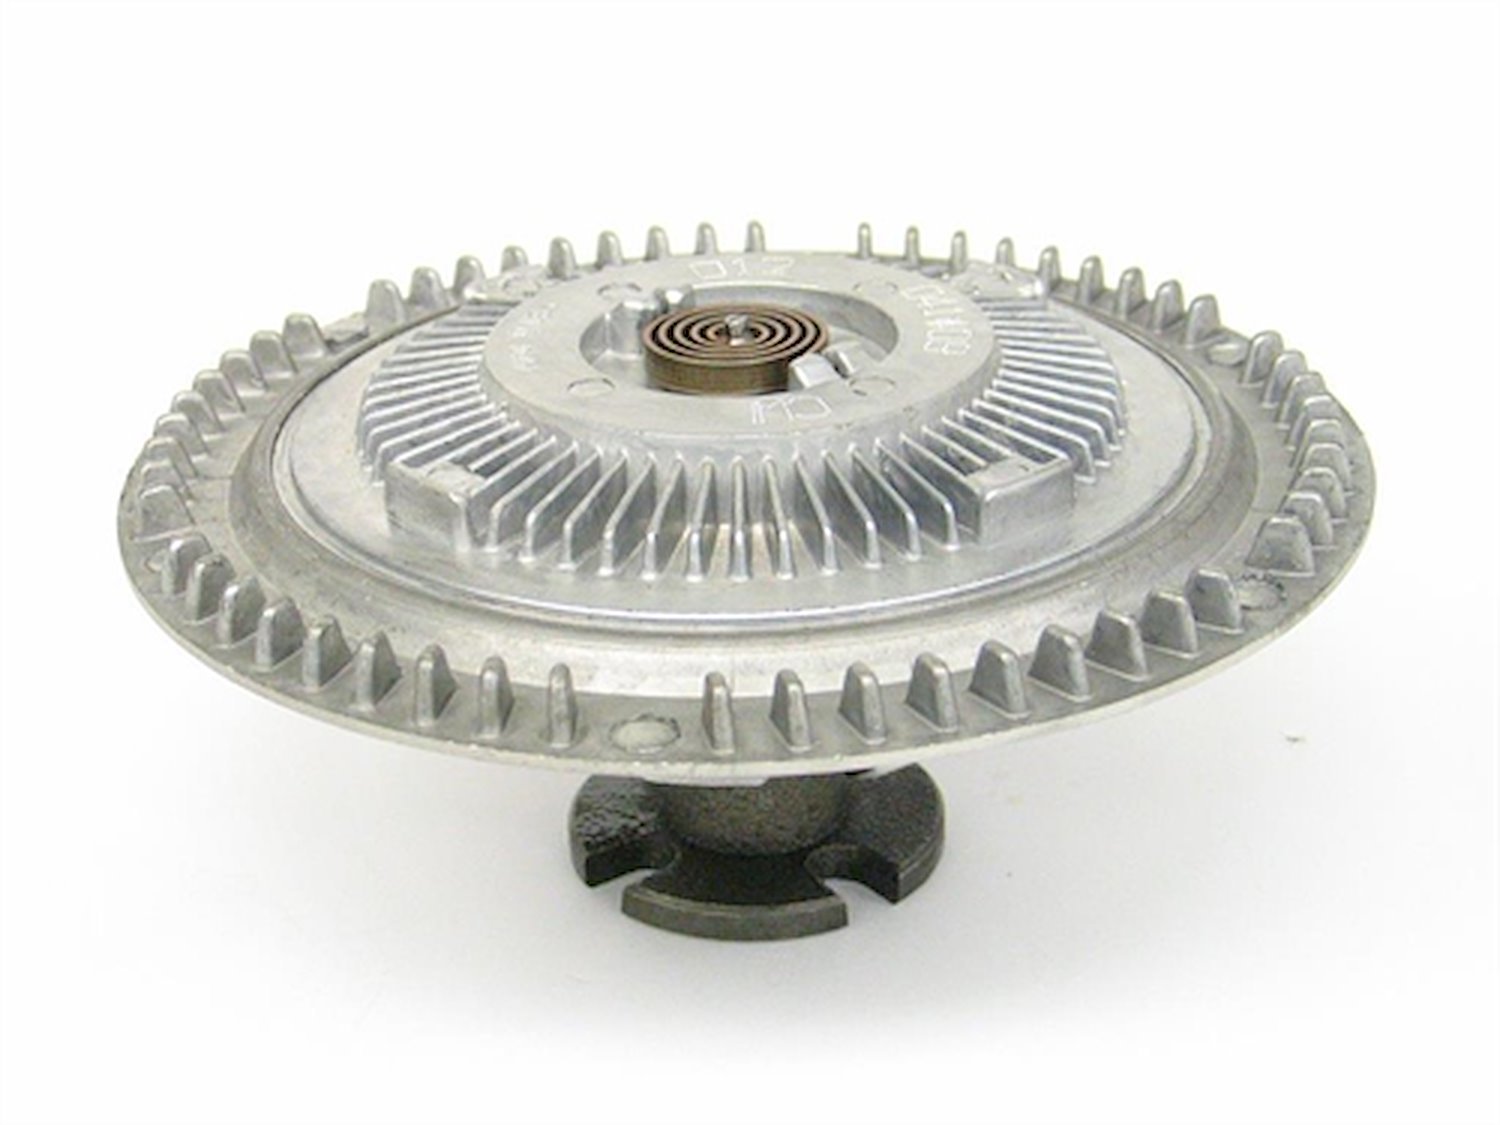 Standard Duty Thermal Fan Clutch for 1960-1983 Ford/Chevy Corvette